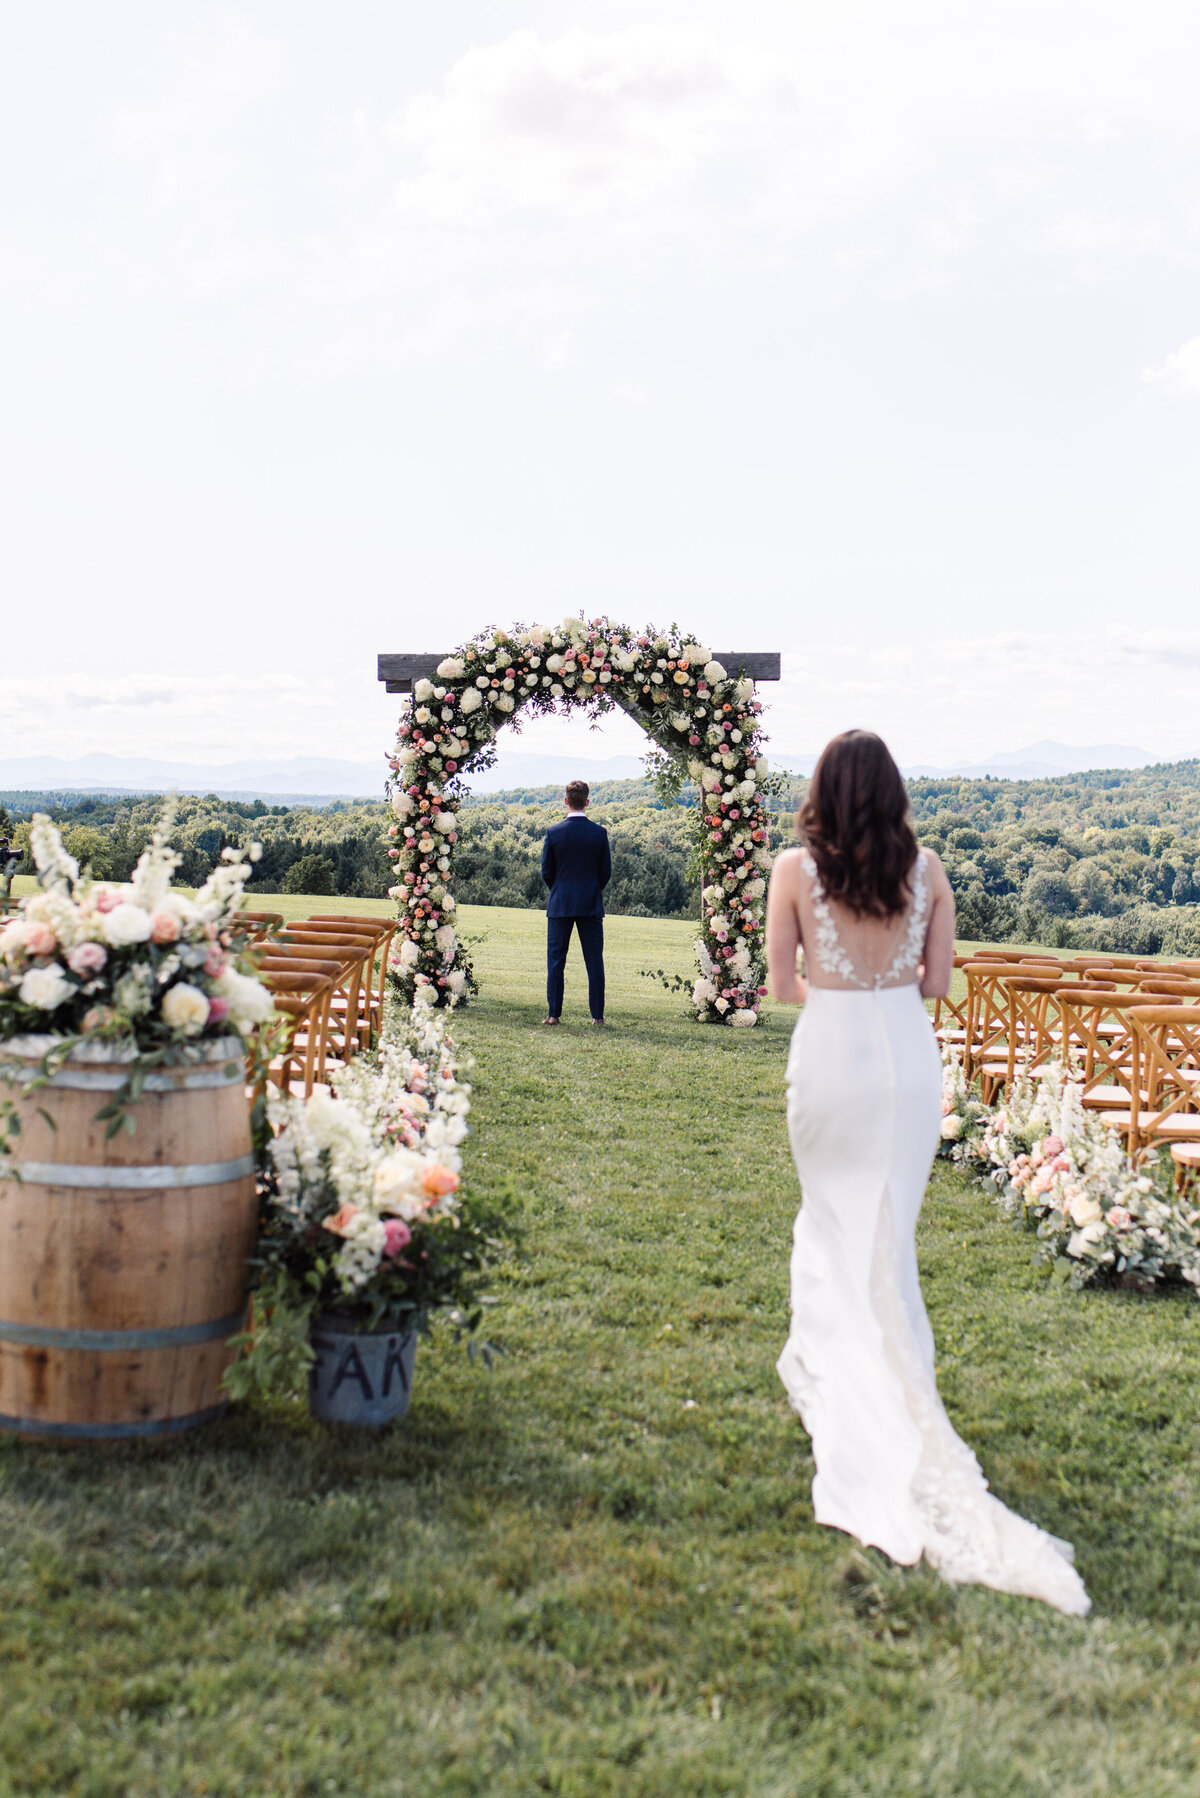 First look with Bride and Groom at Maquam Barn and Winery in Vermont, bride in Alexandra Grecco and floral arch by Clayton Floral.